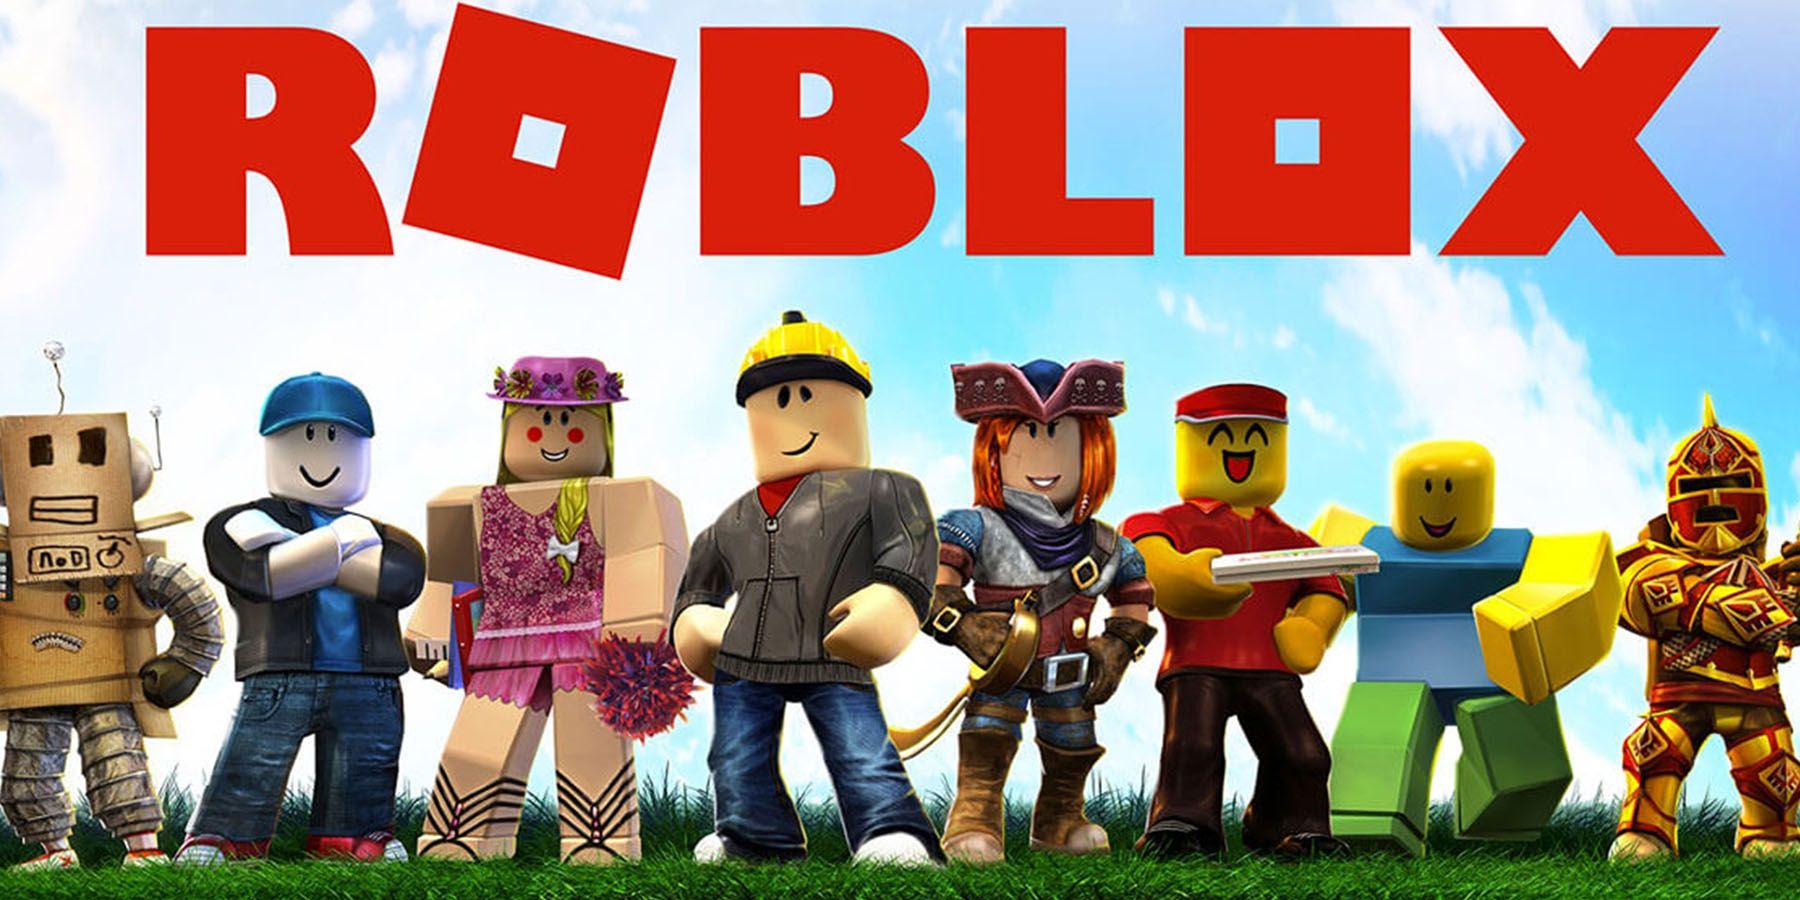 Russian Ruble now worth less than the Robux video game currency